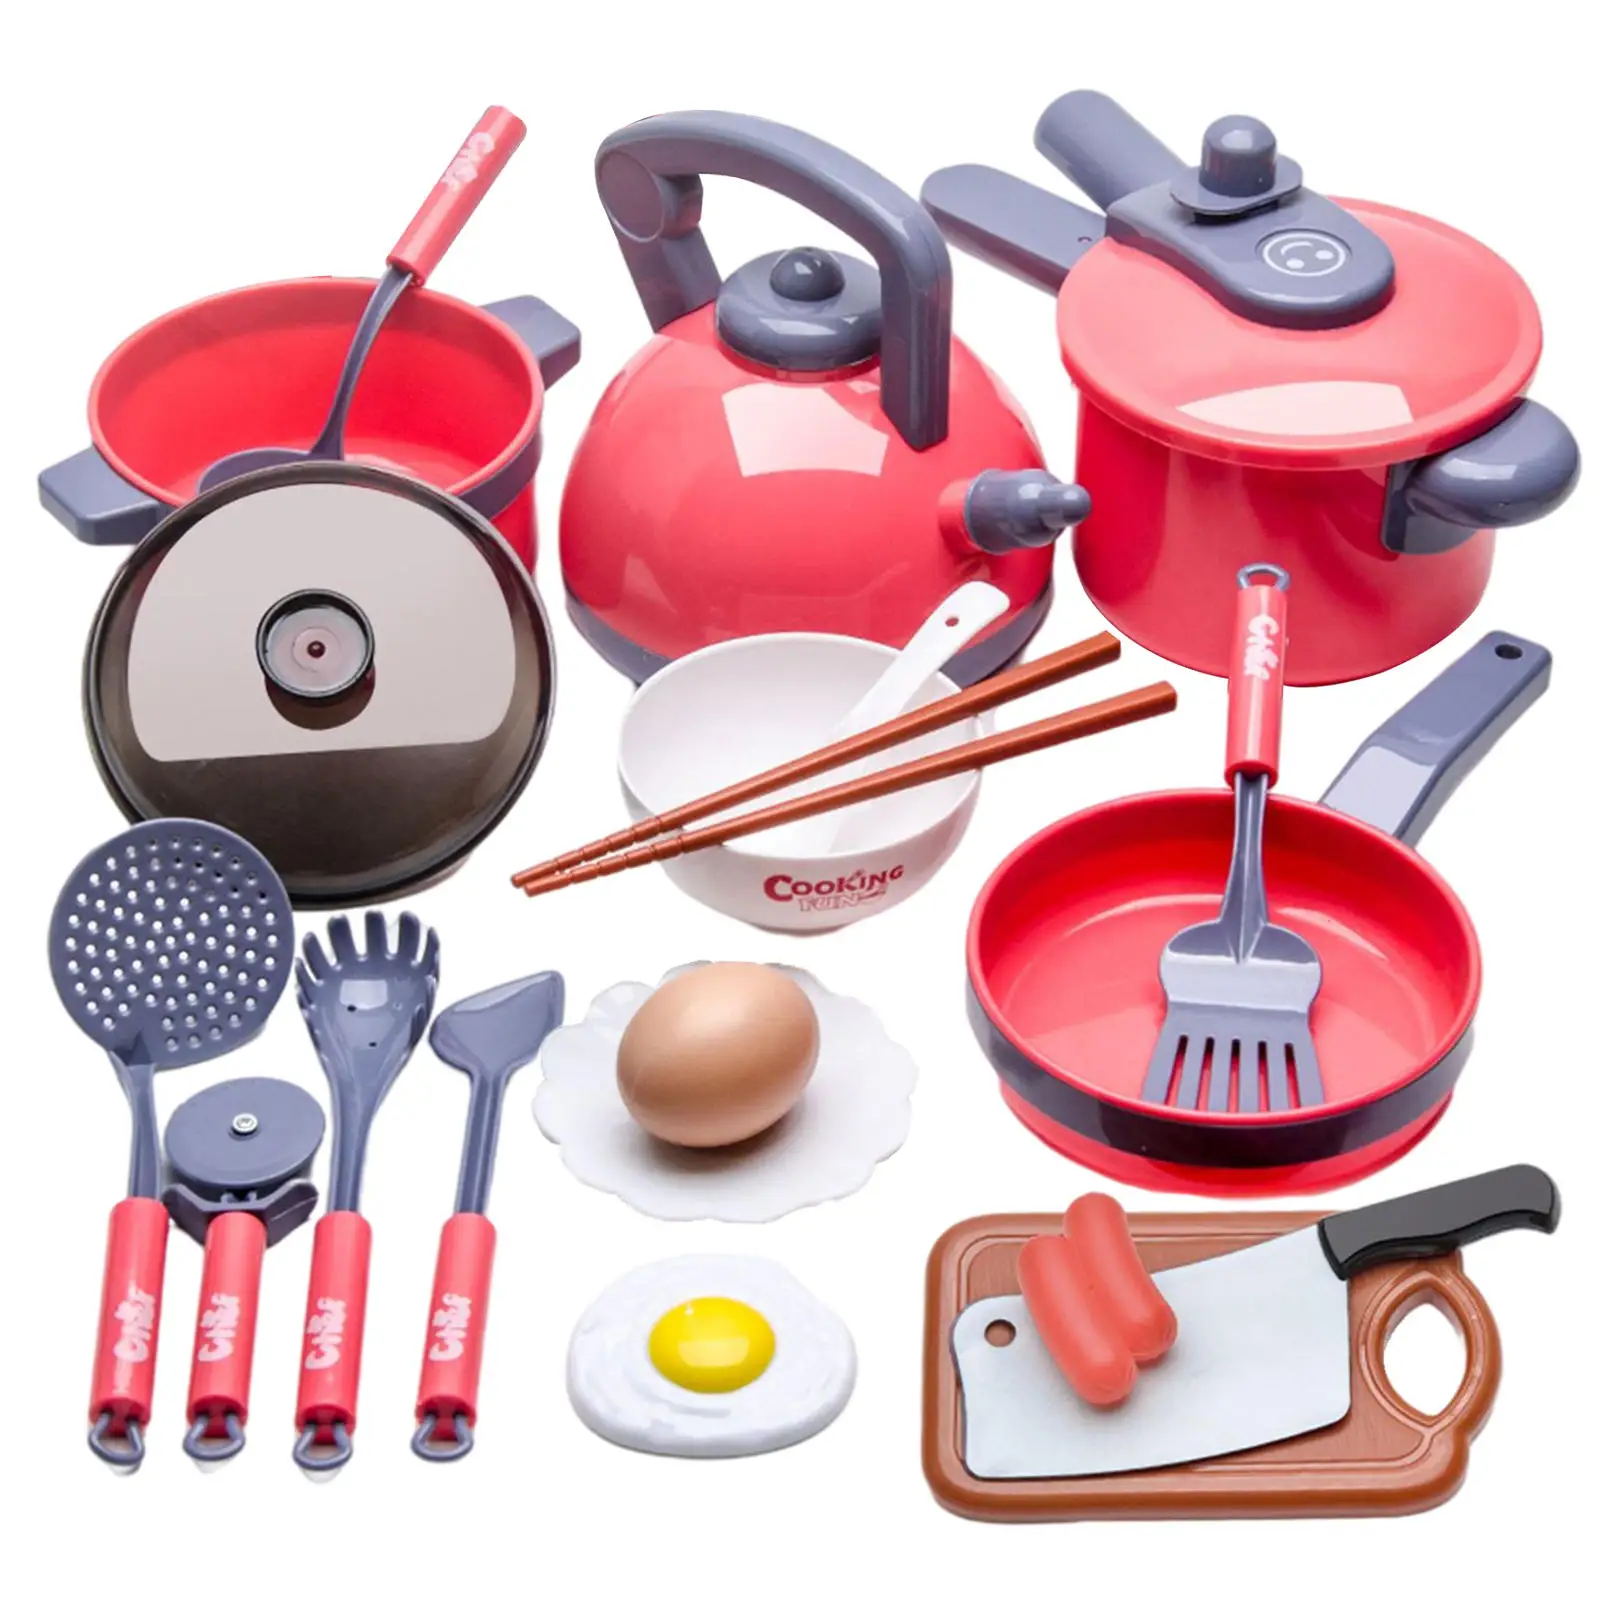 20Pcs/Set Kitchen Pretend Play Pot and Pans Sets Toys Utensils Accessories Educational Gift for 3 4 5 6 Years Old